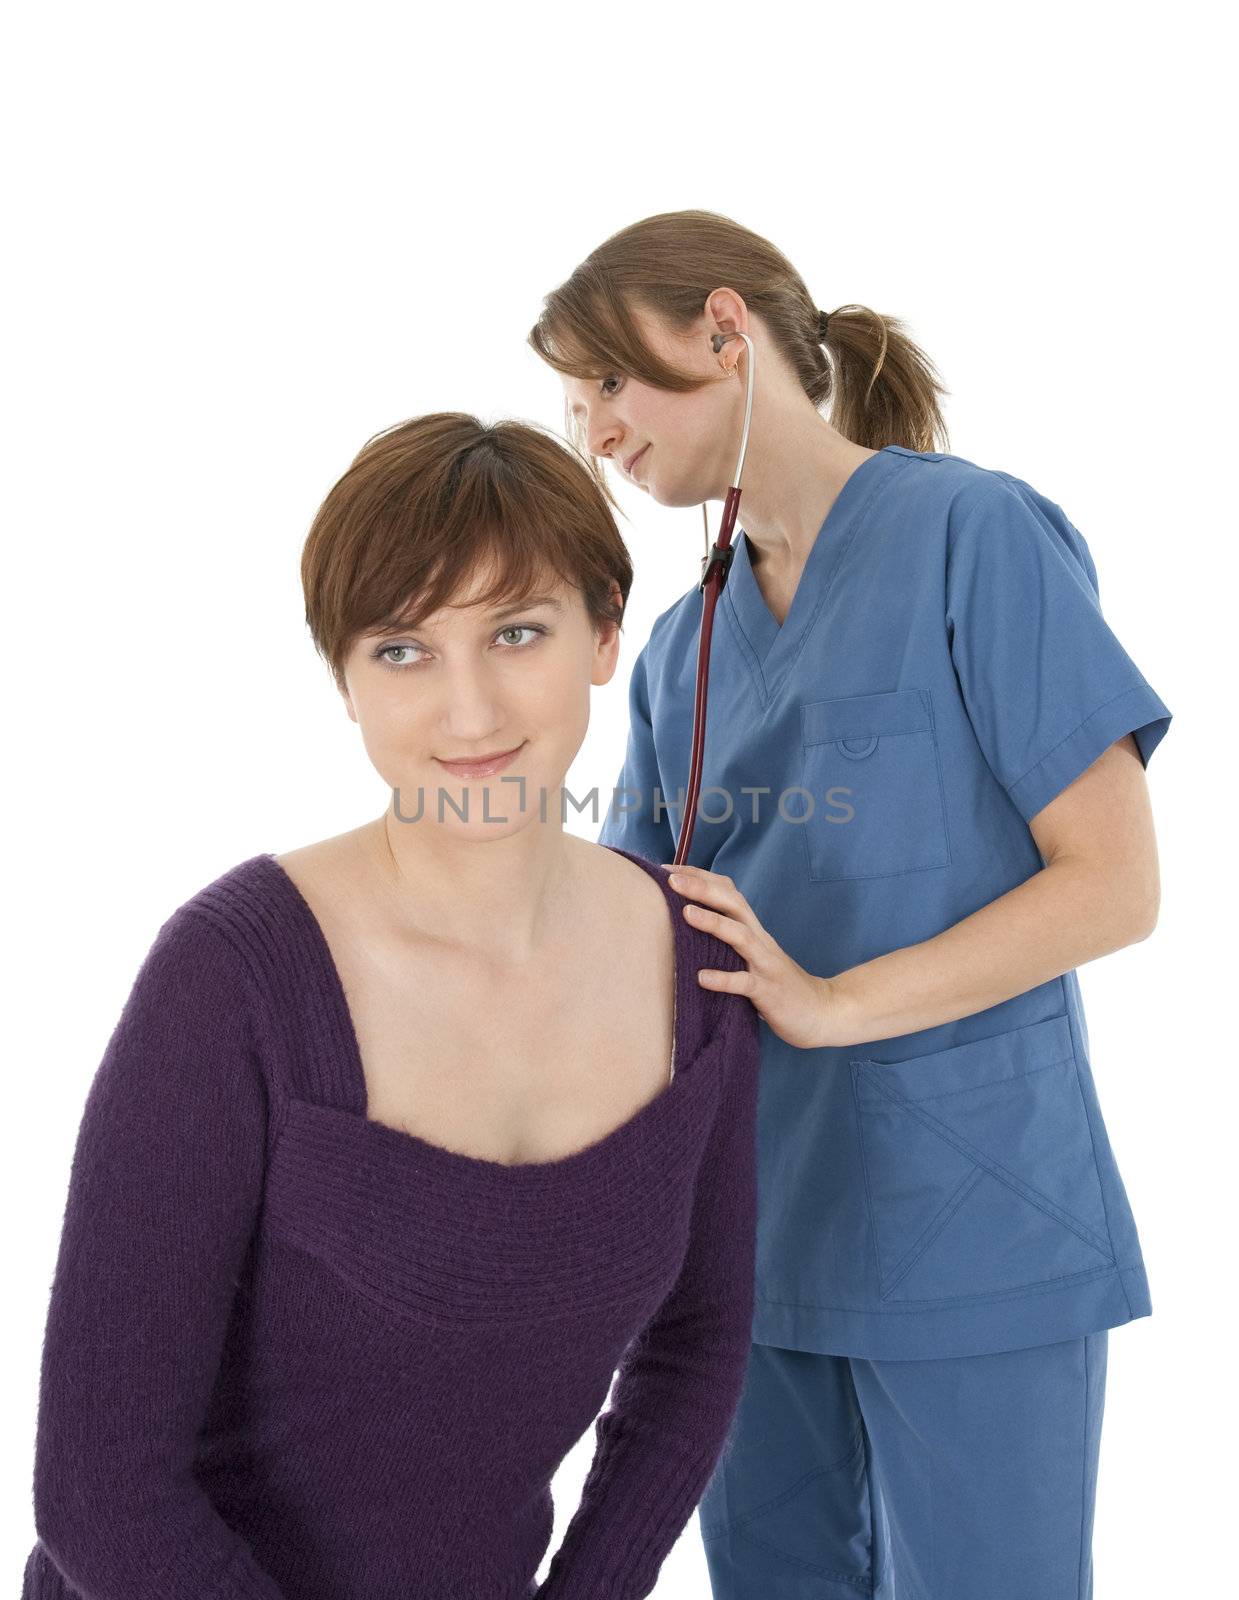 Competent nurse listening to patient's heart with stethoscope.